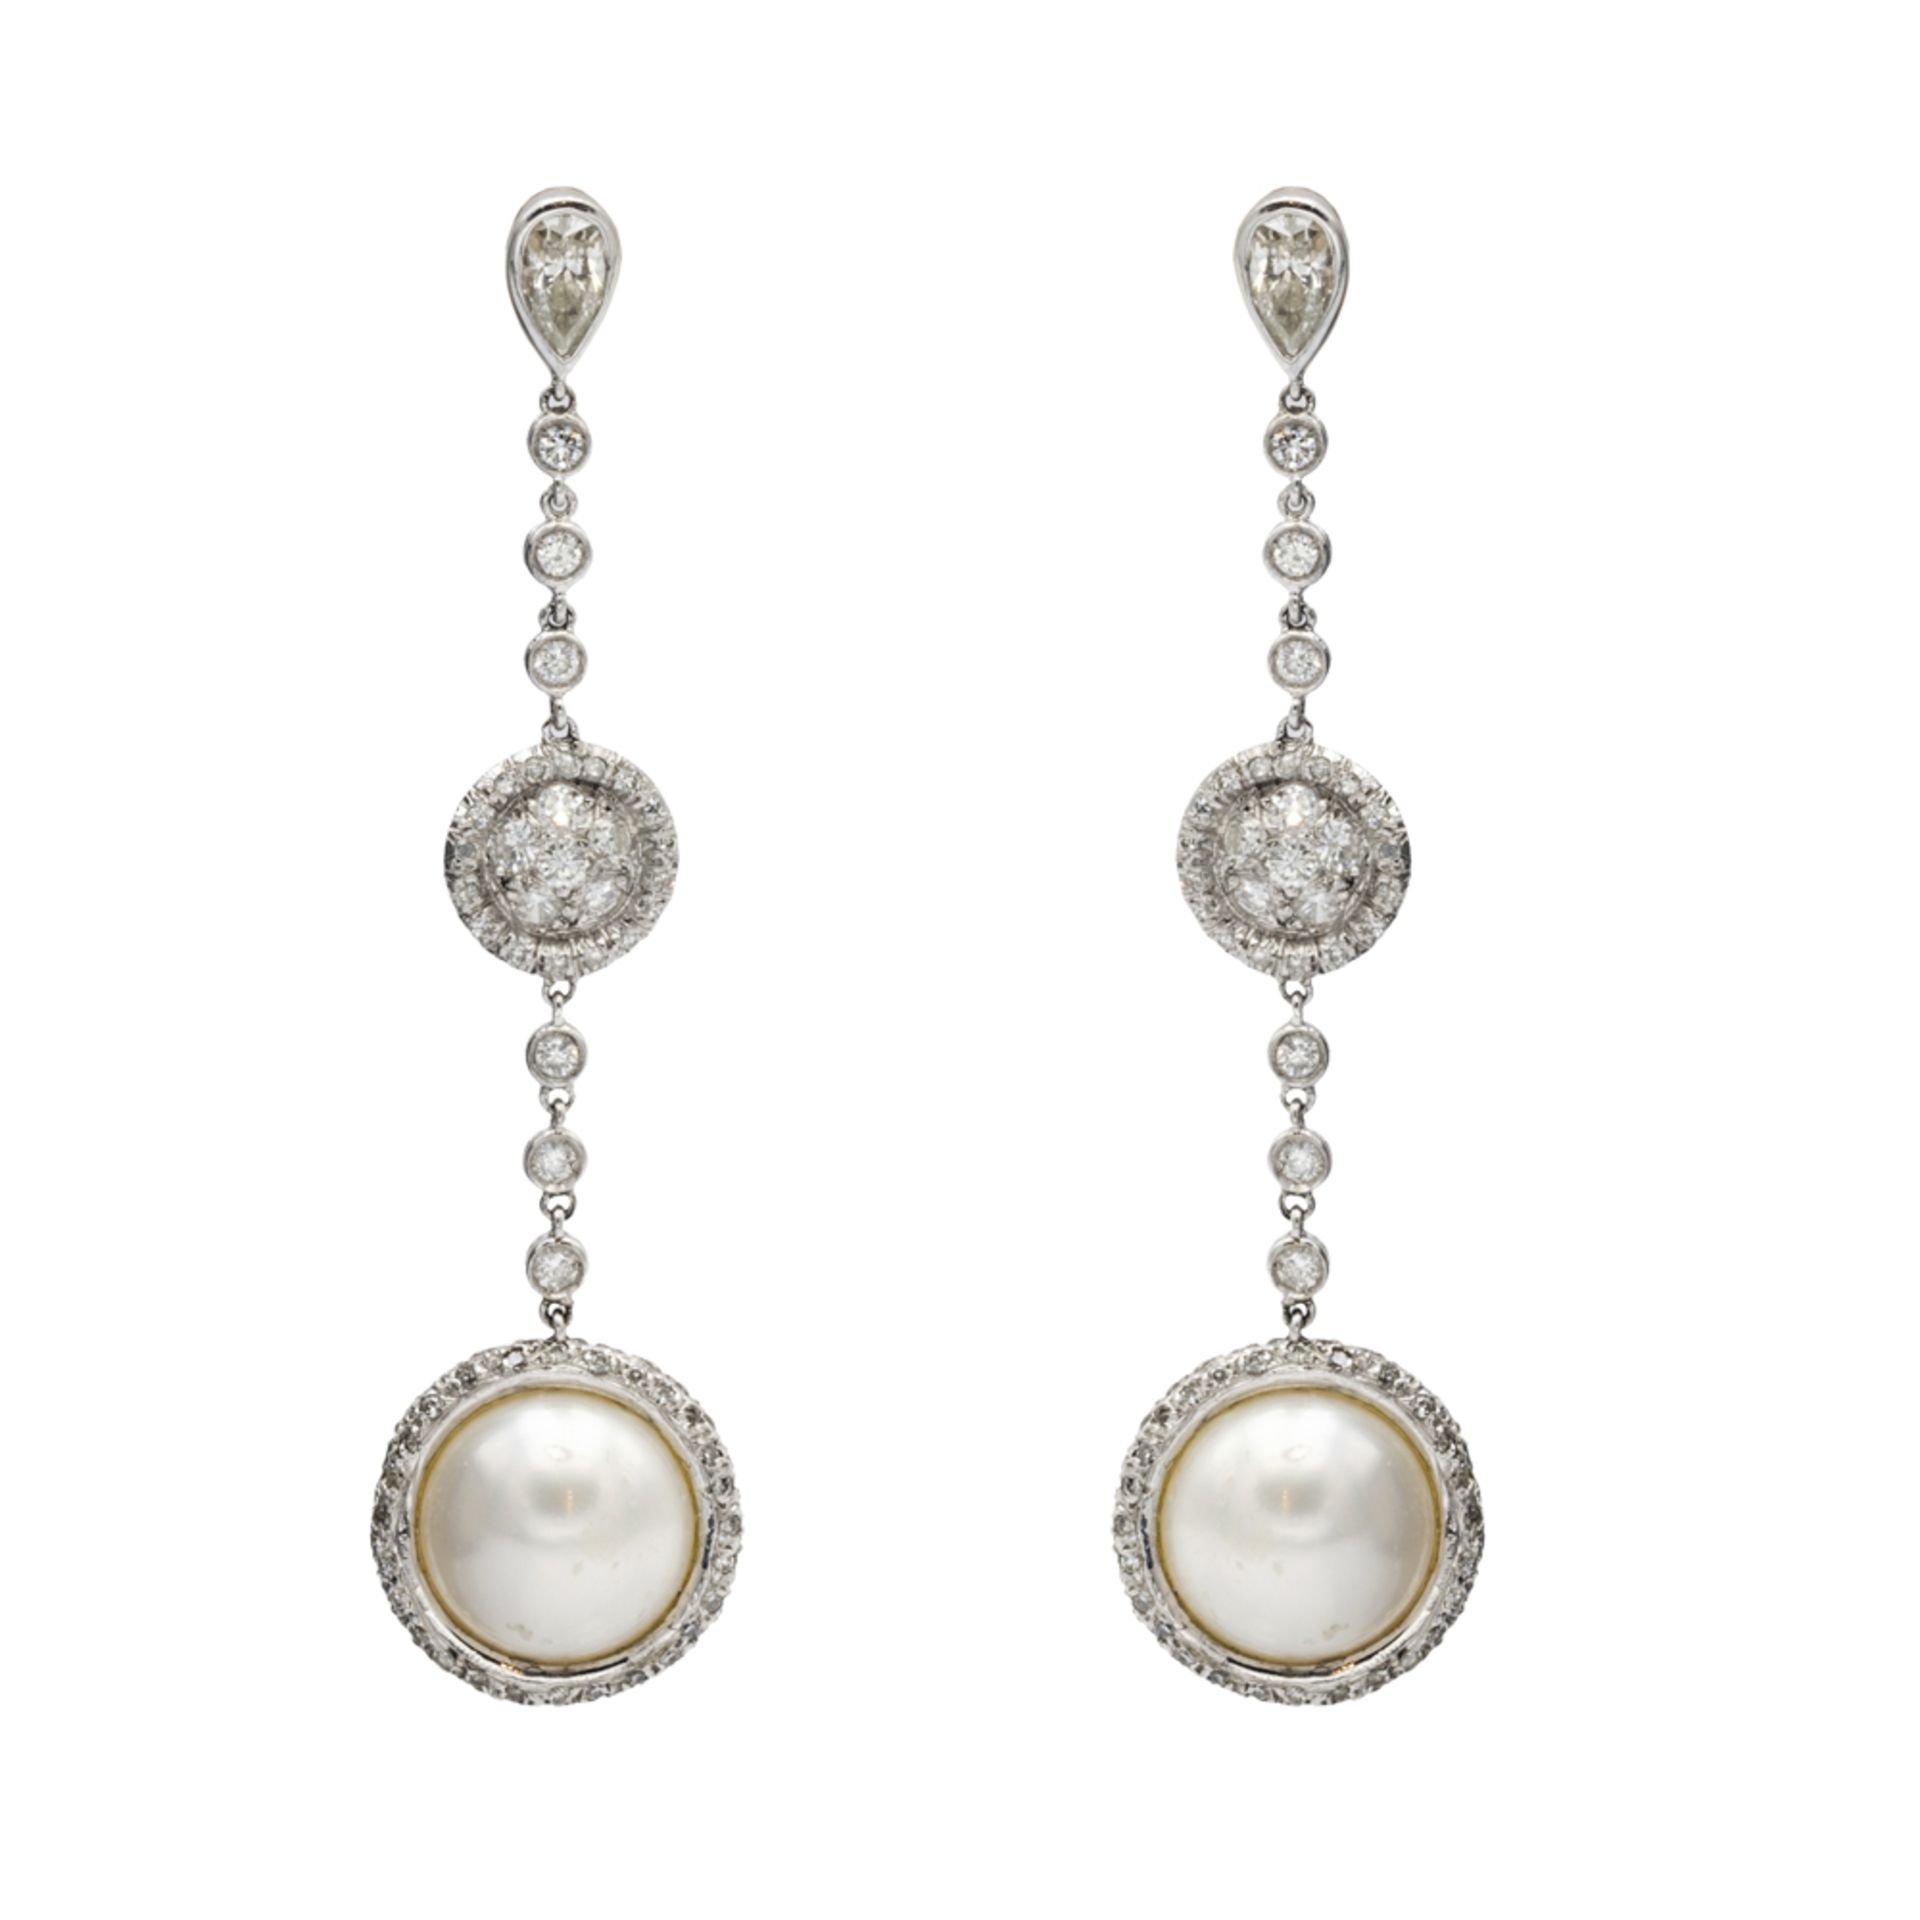 18kt white gold, diamonds and mabé pearls Pendant earrings